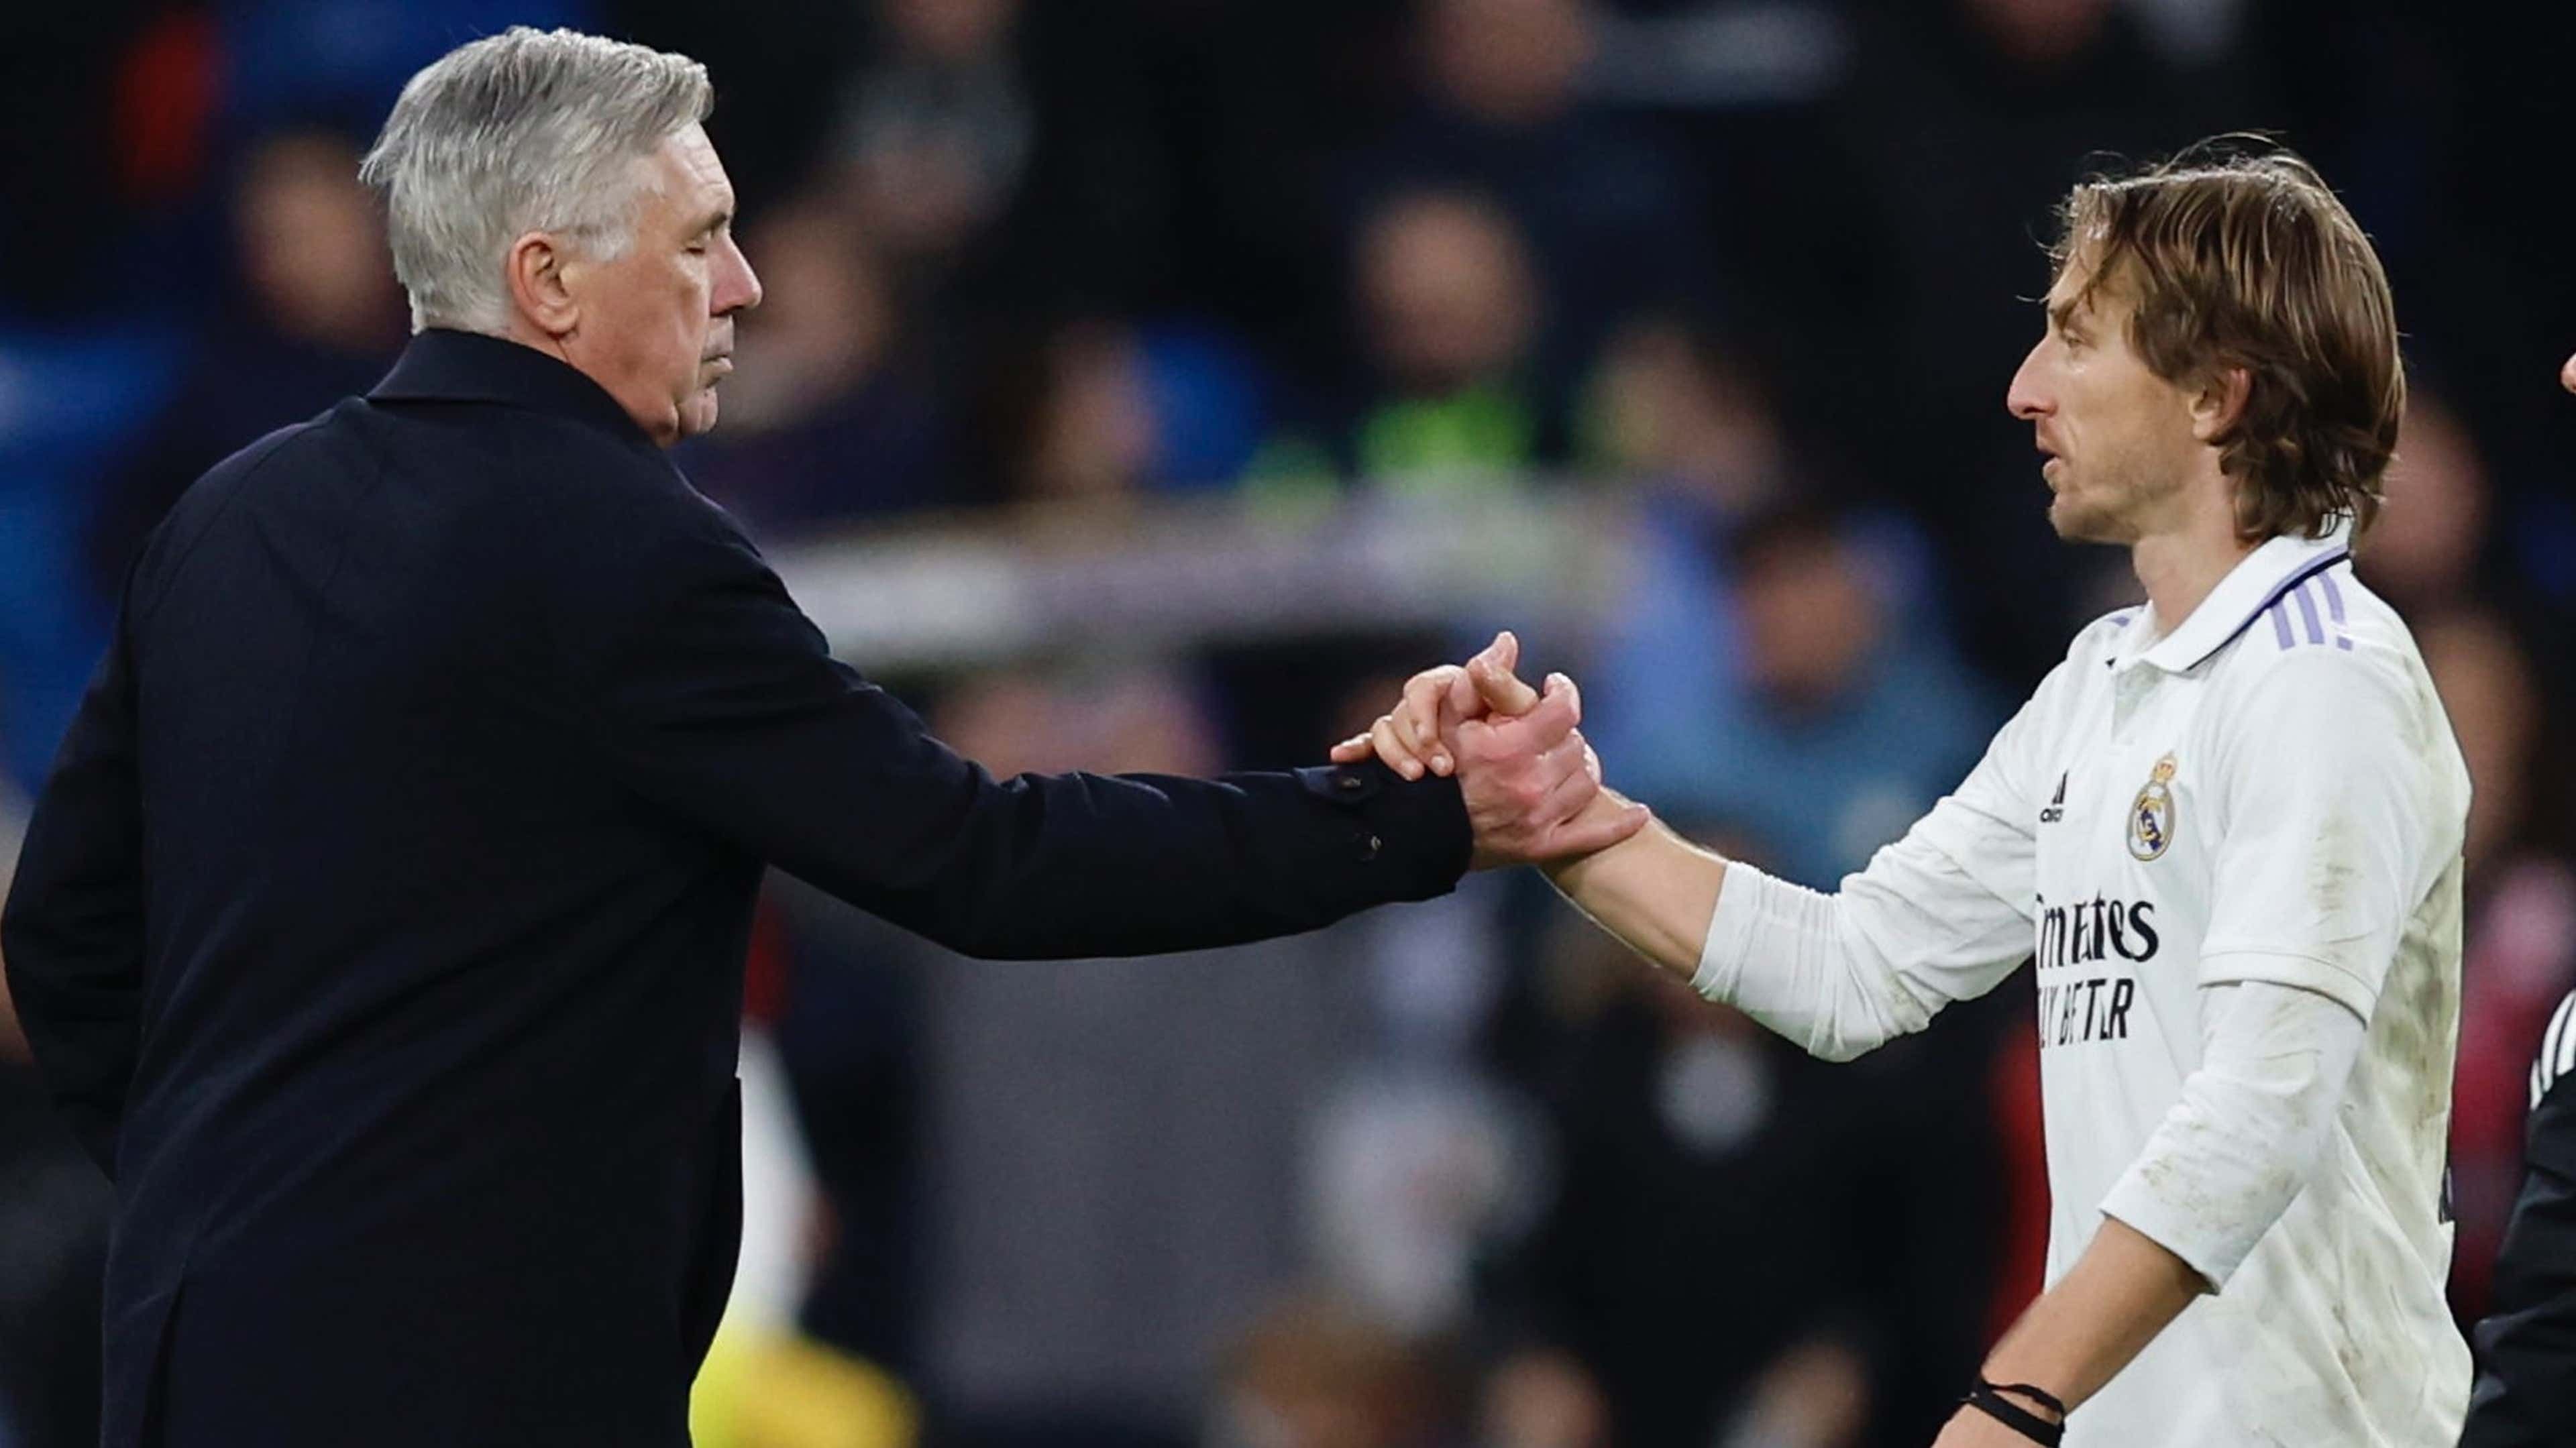 Real Madrid's Ancelotti Extends Coaching Staff Offer To Modric